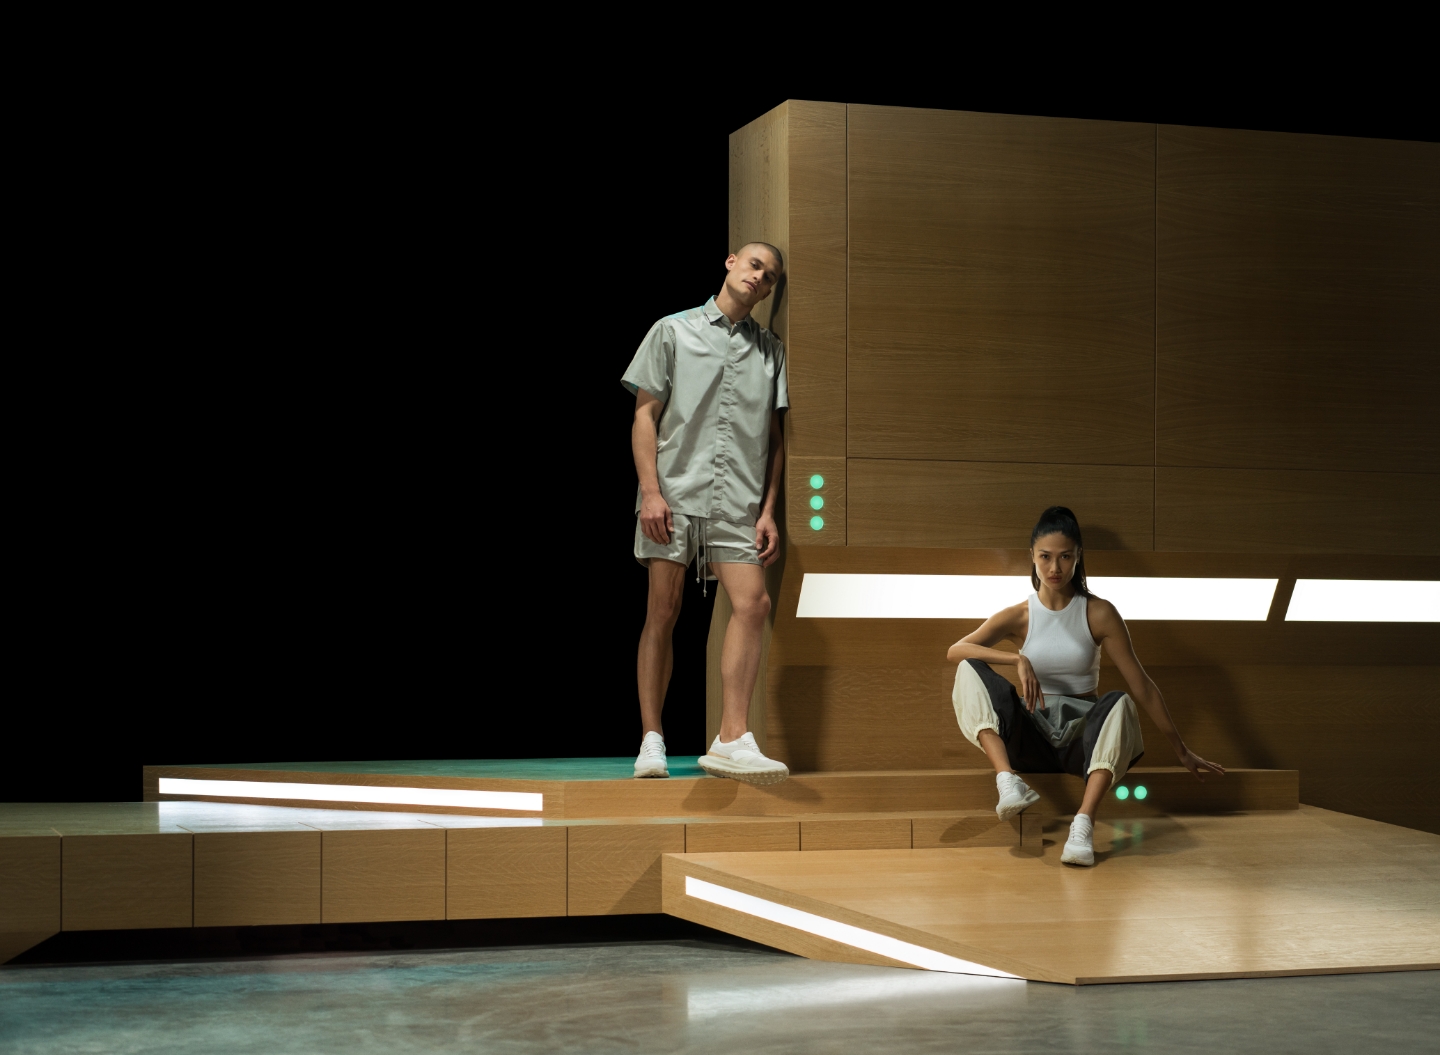 A man and woman pose on a wooden stage while wearing casual clothes and Magnanni sneakers.